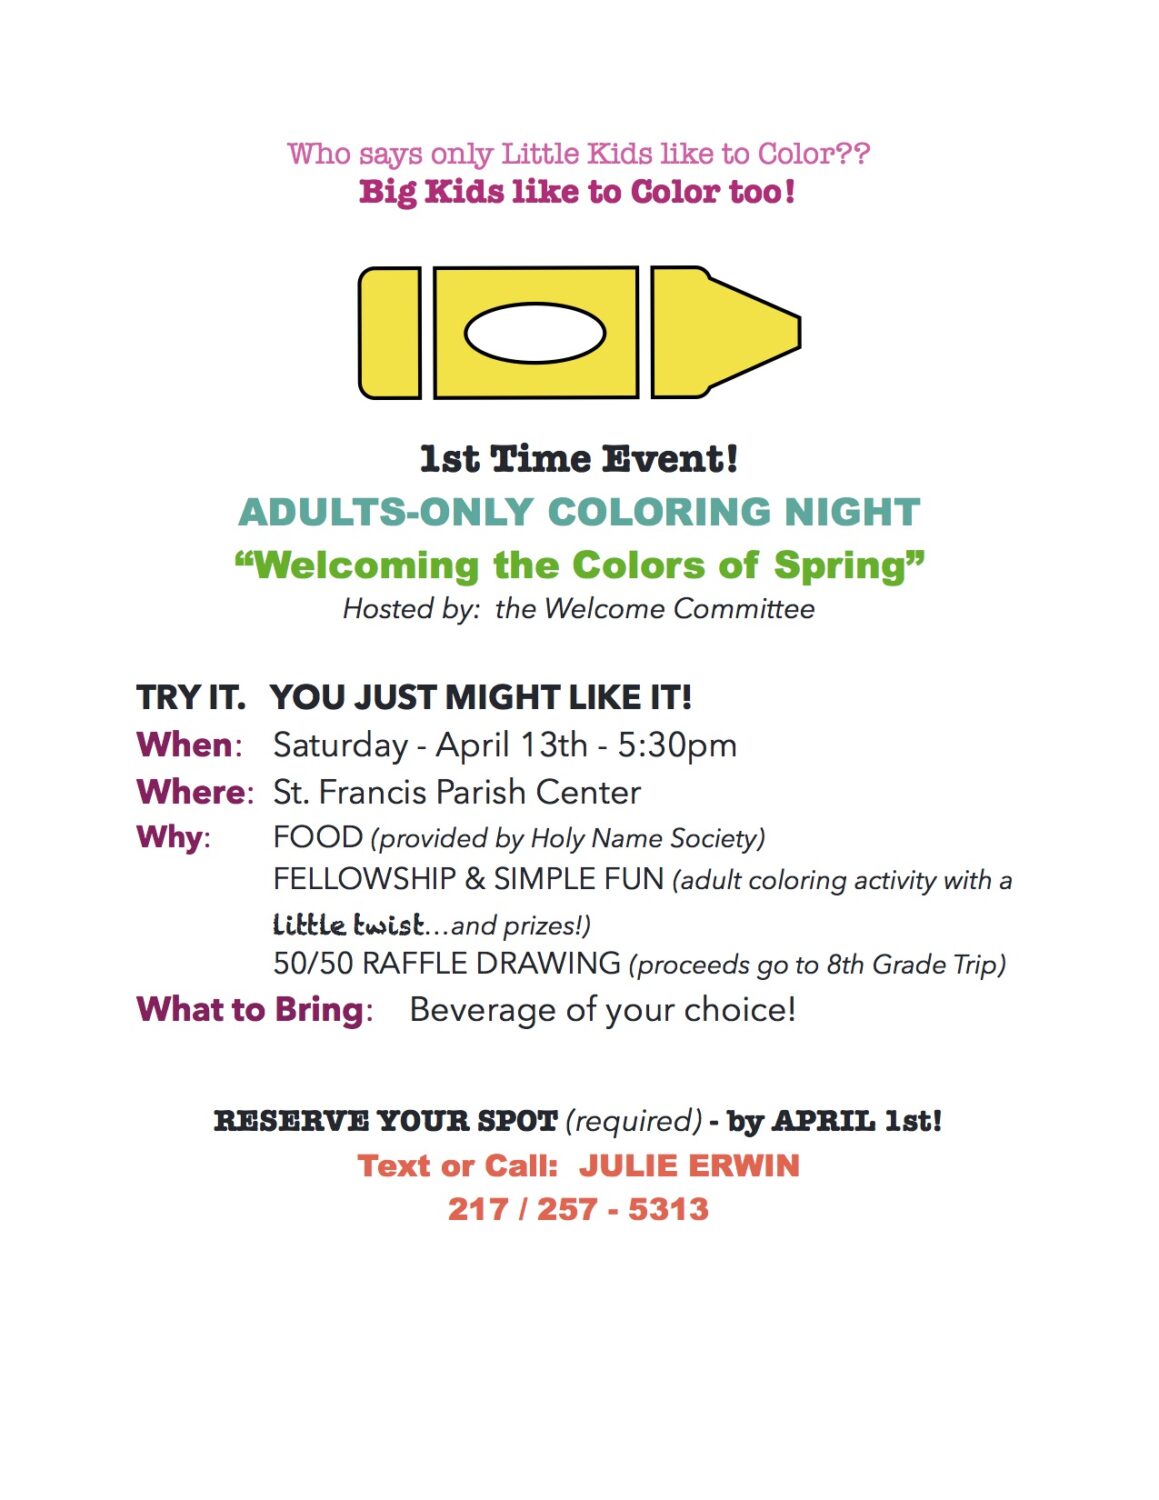 W&W 1st Event - Adult COLORING Night